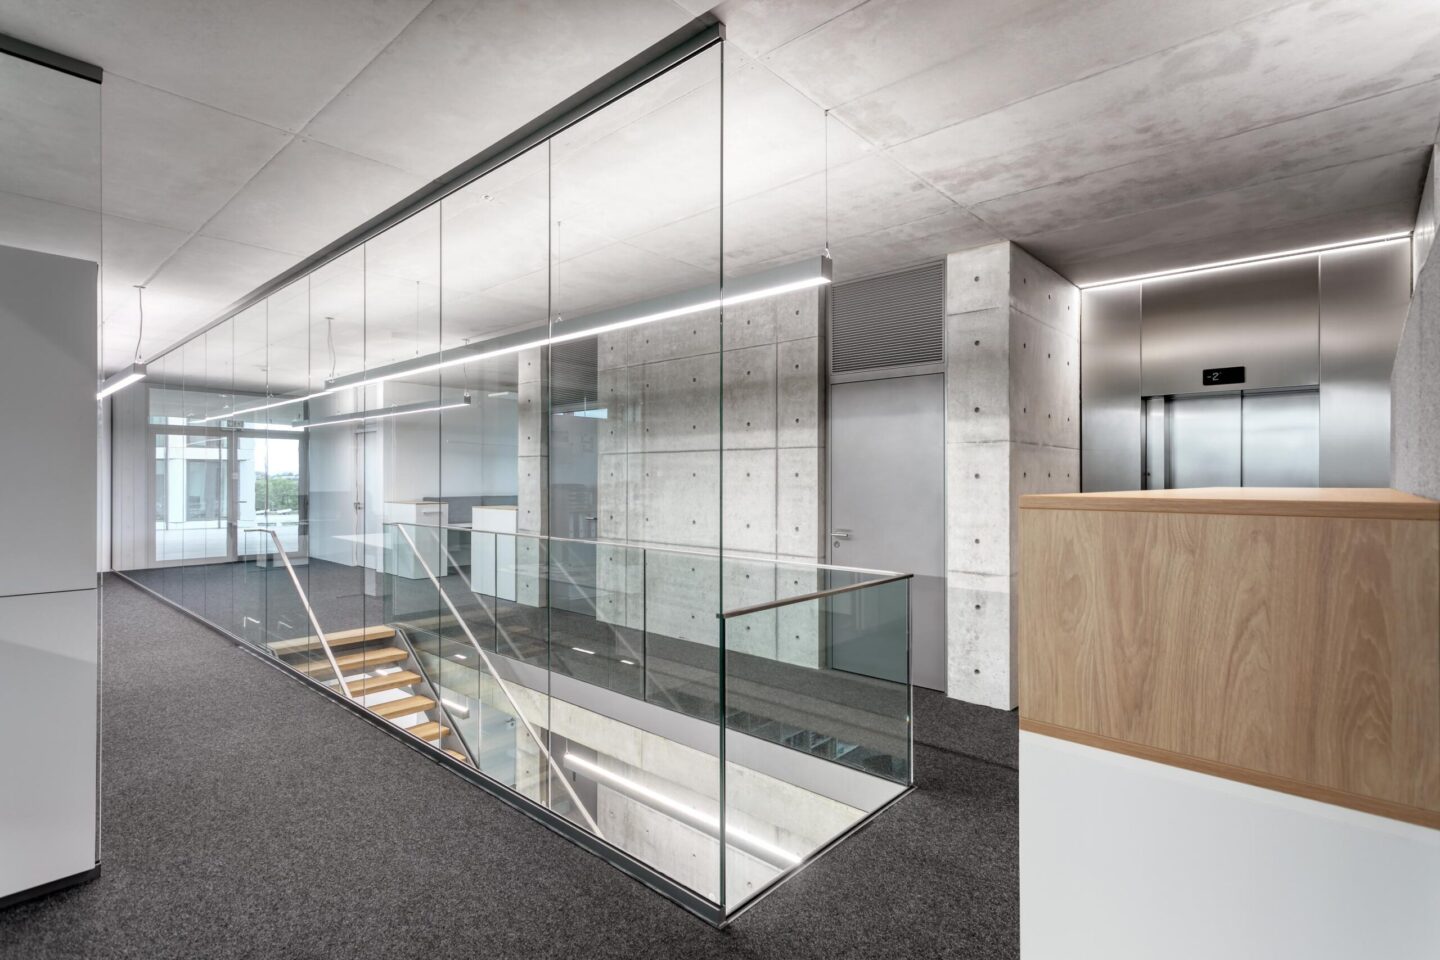 feco │ partition wall systems│ projects │ weisenburger Karlsruhe